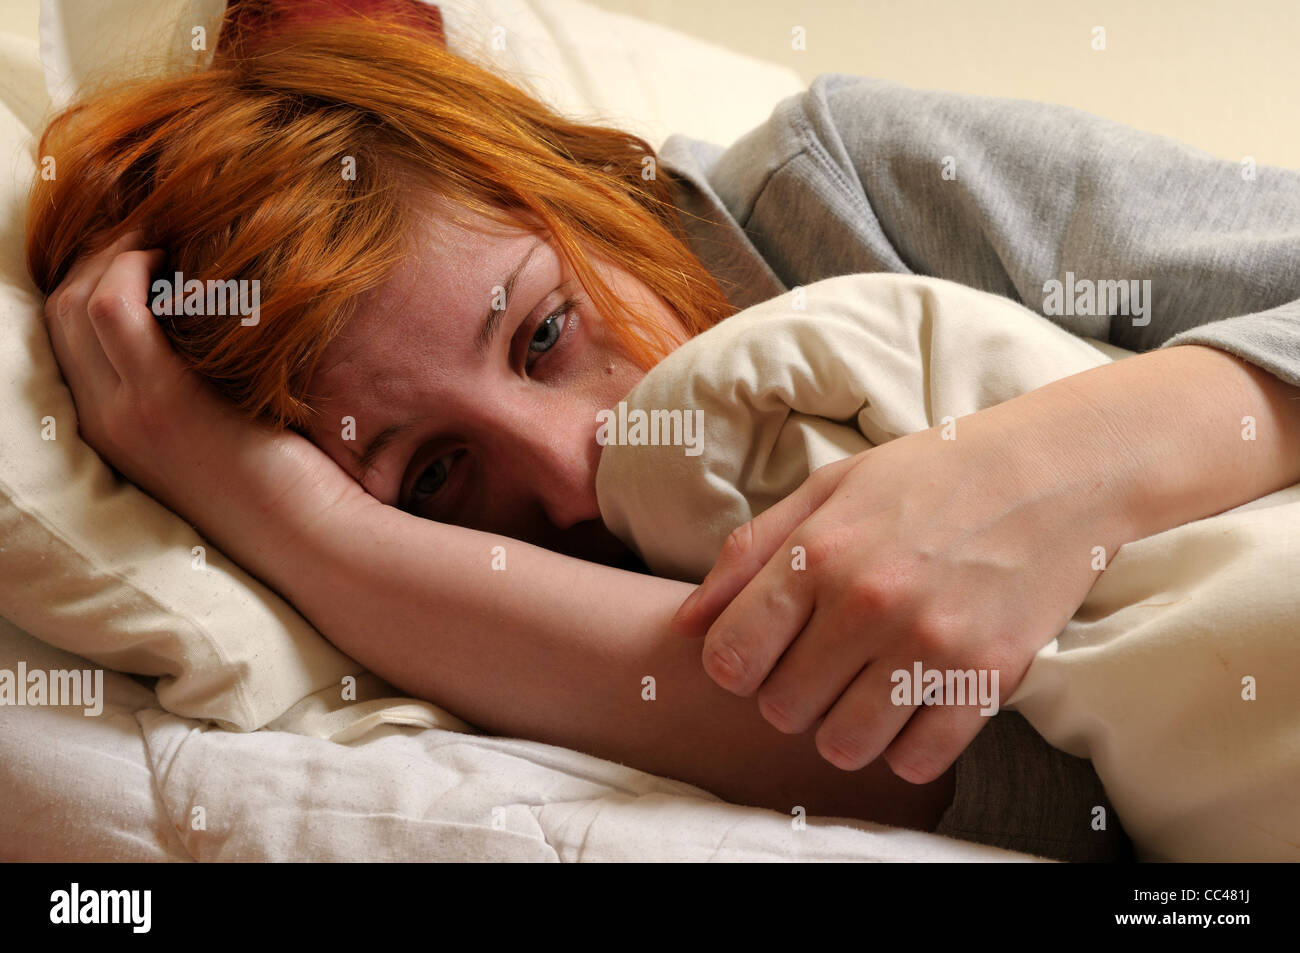 Young Women In Bed Unwell. Stock Photo